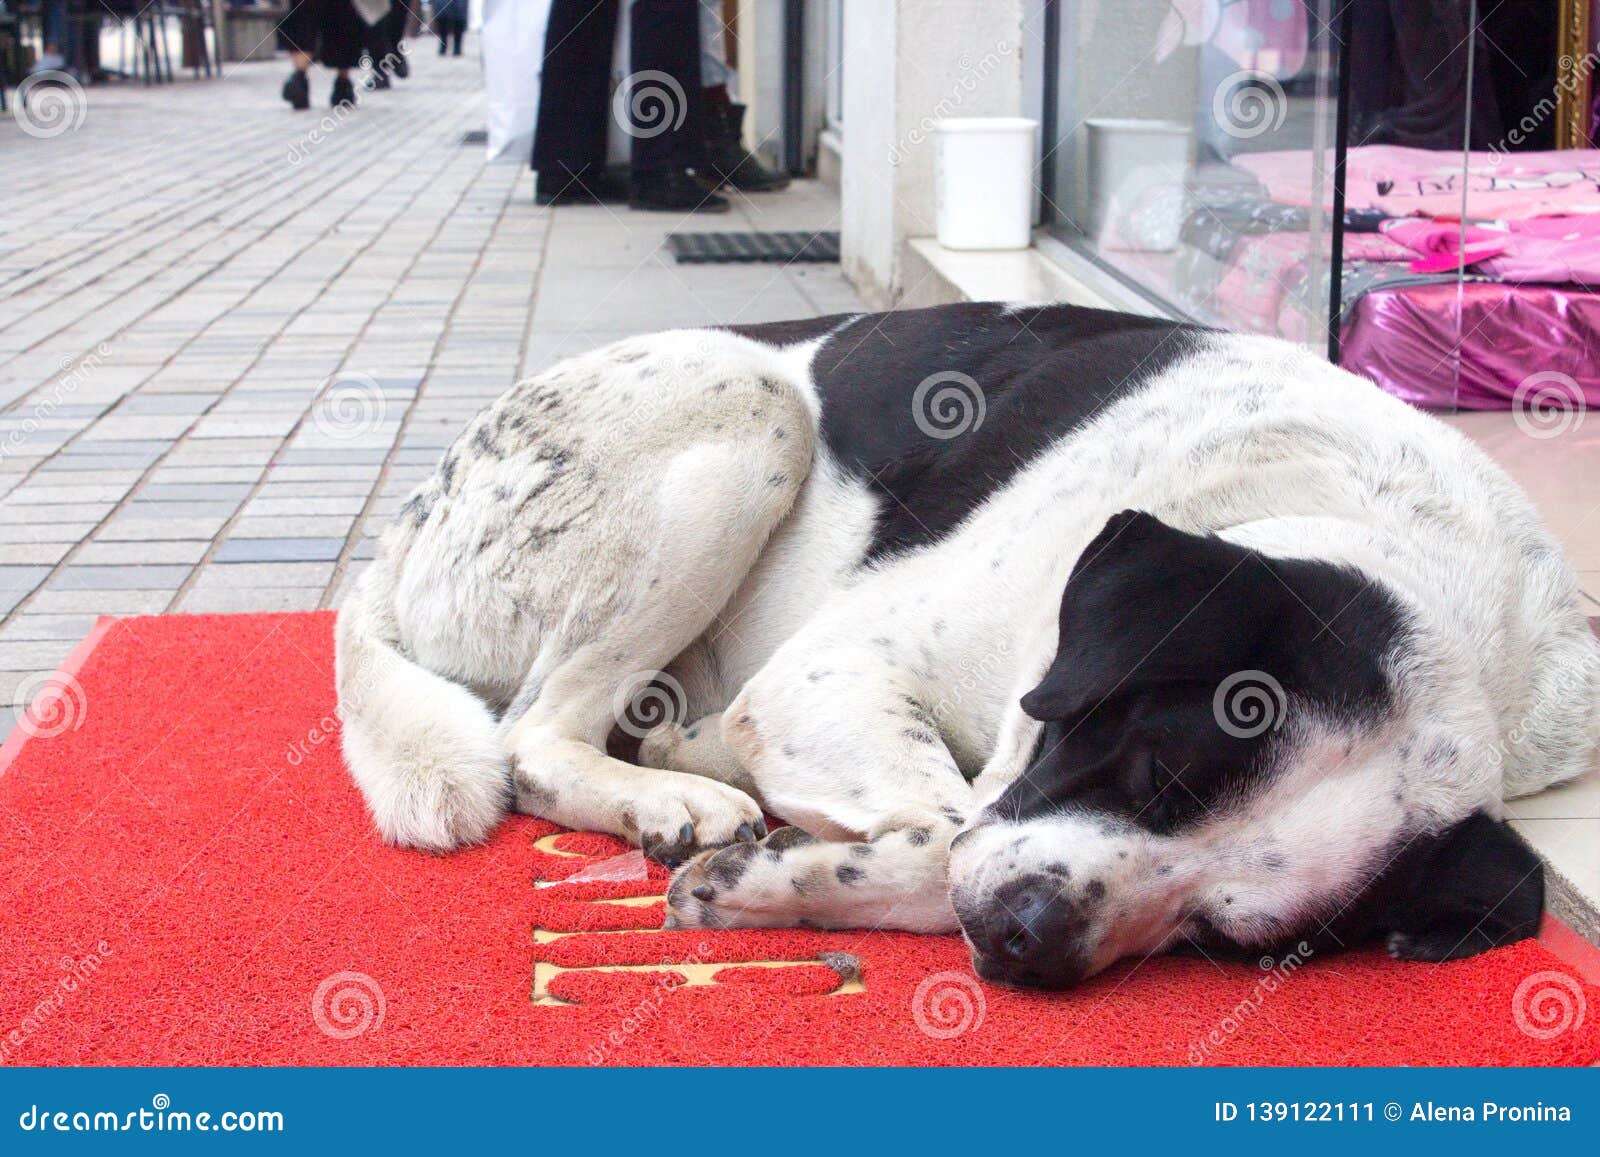 white and black dog sleeping on red carpet with word wellcome on the street in entrance of the shop